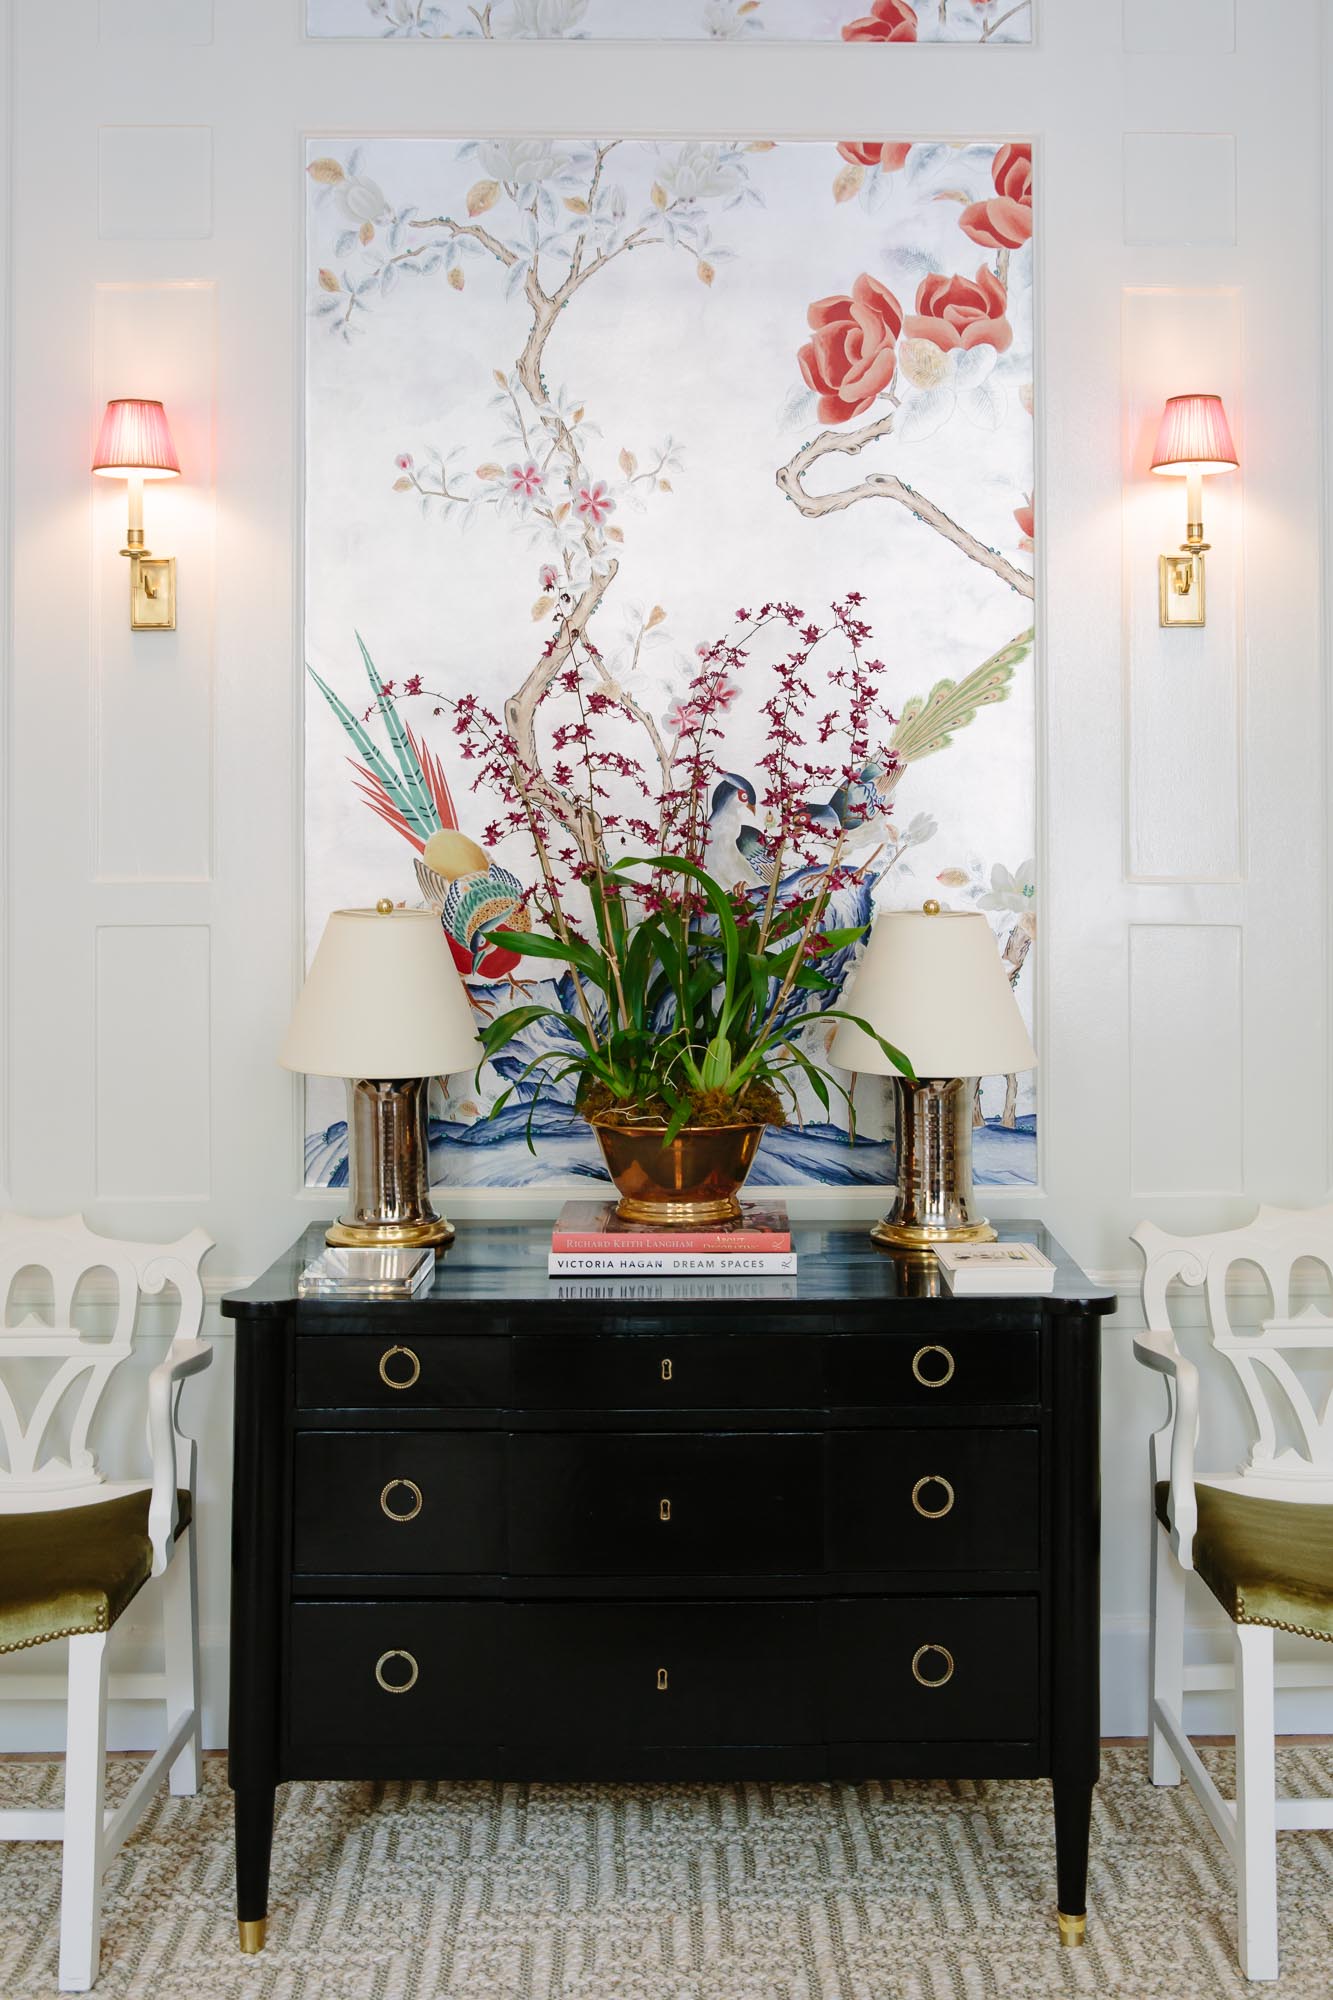 Kips Bay Decorator Showhouse featured by top US interior design blog York Avenue